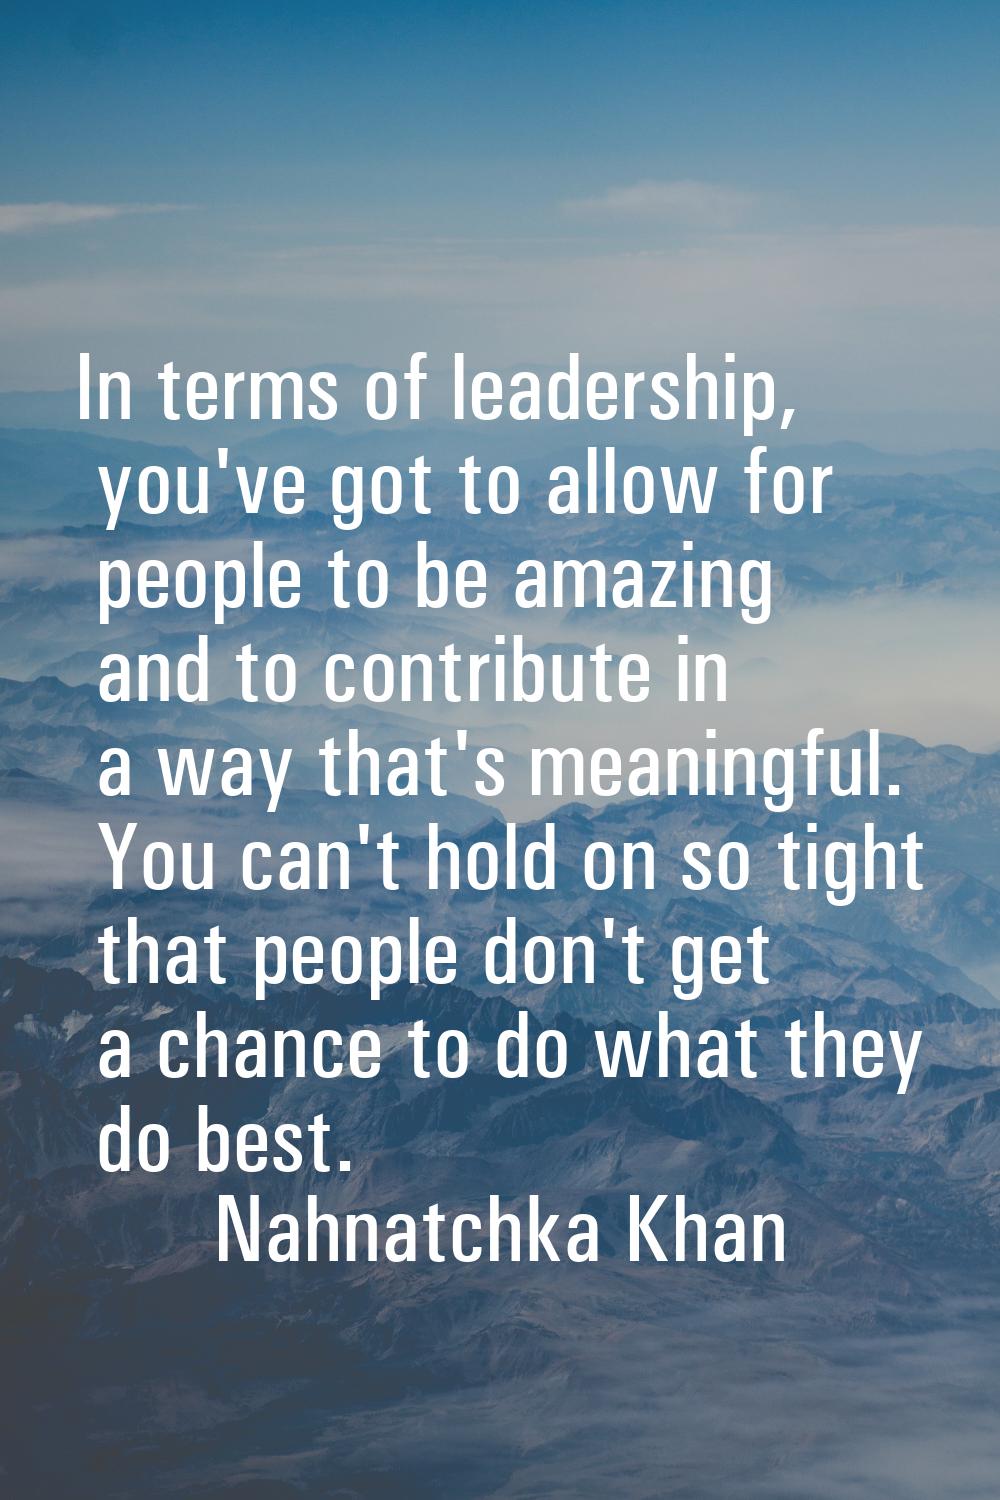 In terms of leadership, you've got to allow for people to be amazing and to contribute in a way tha